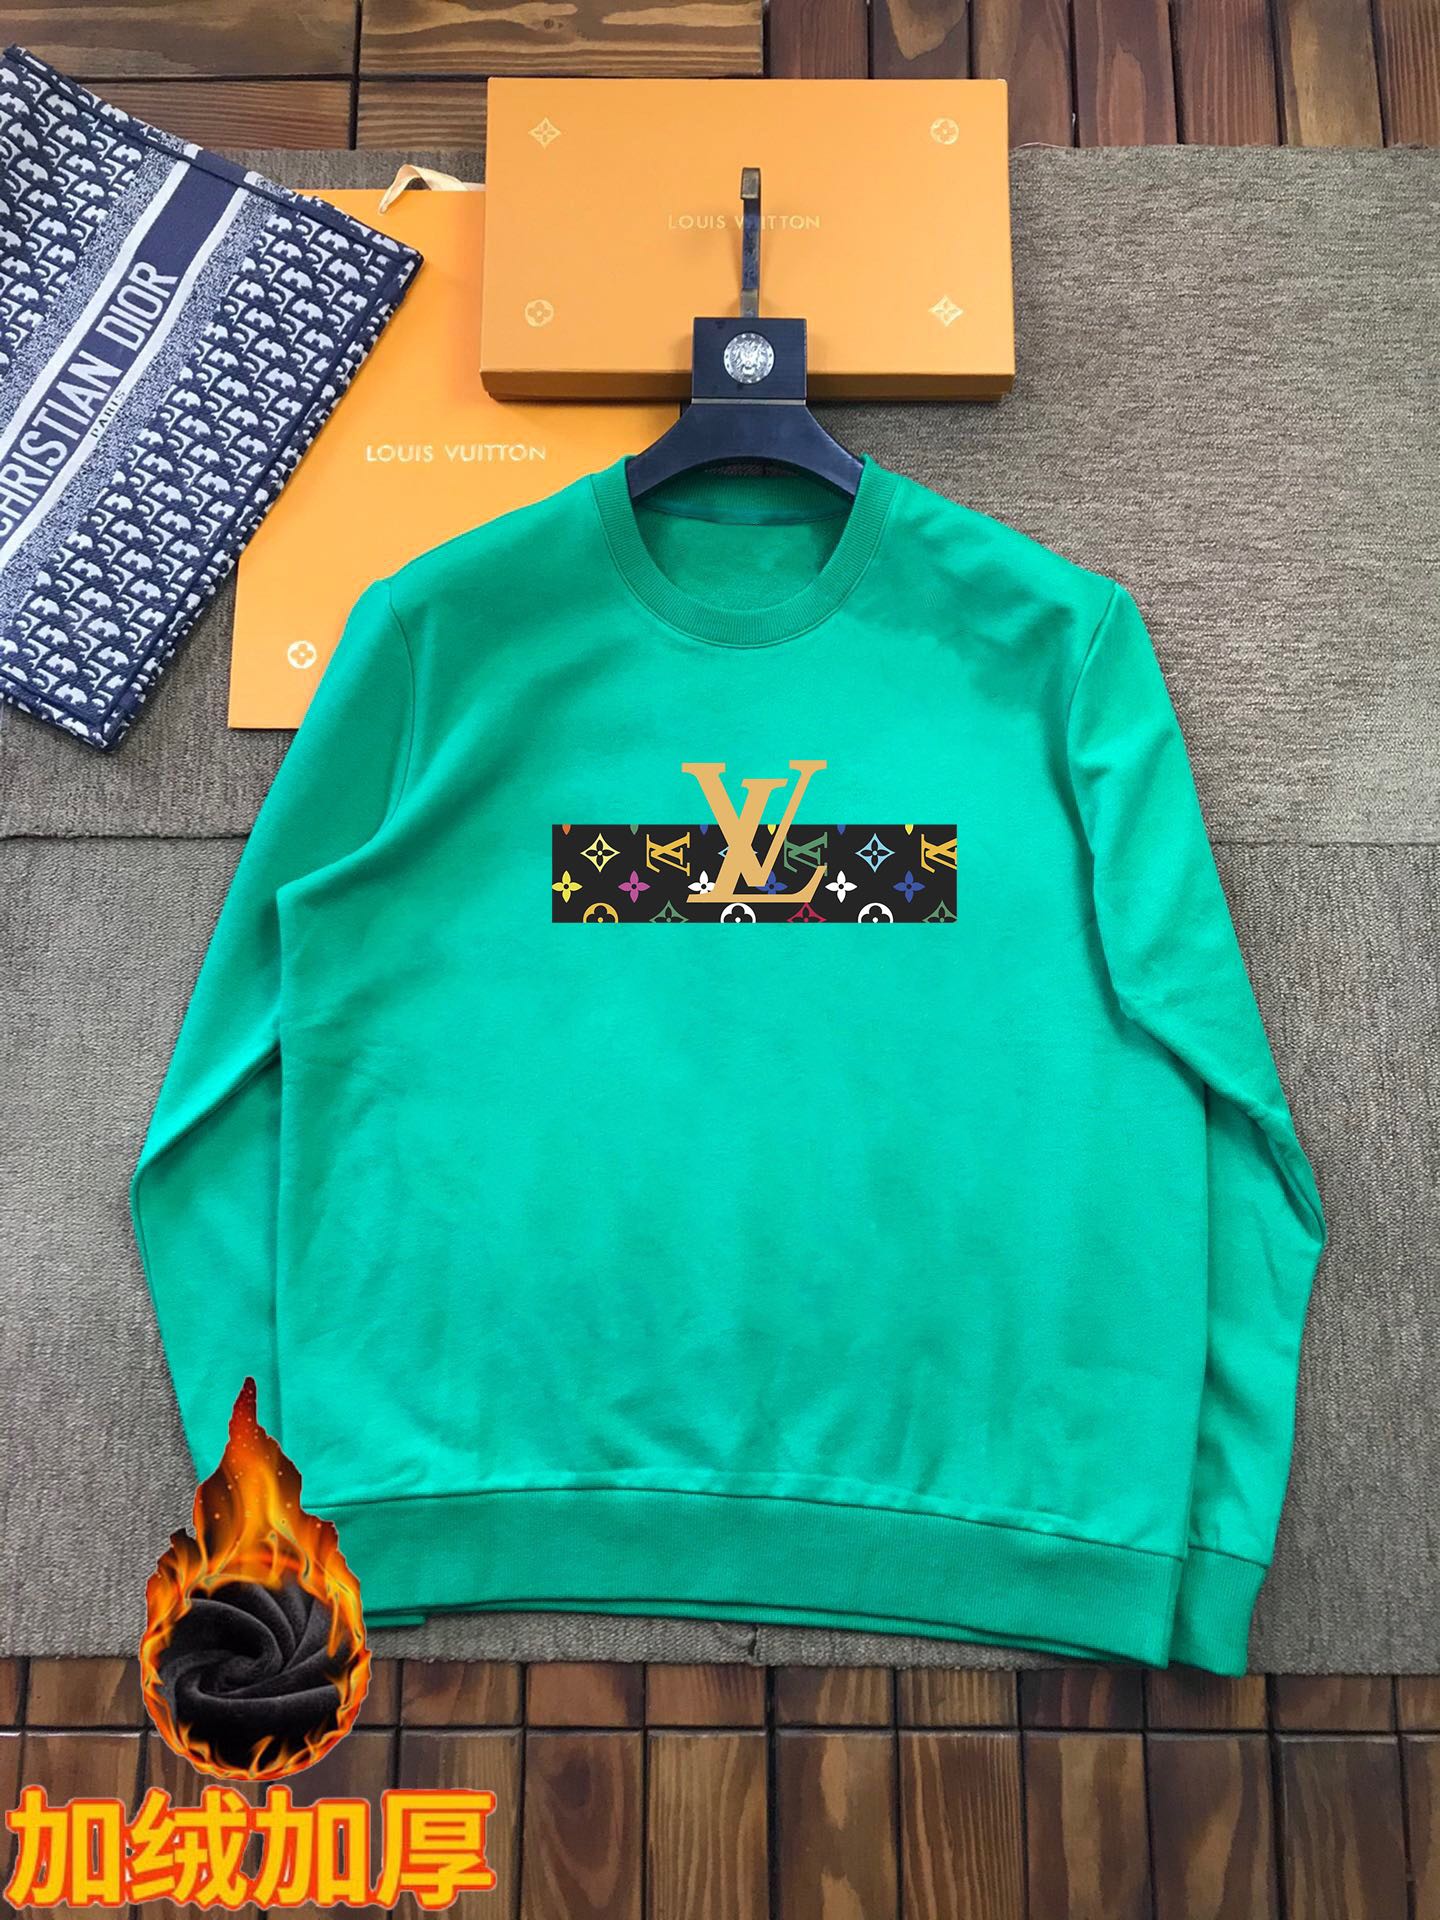 Louis Vuitton Clothing Sweatshirts Unisex Fall Collection Long Sleeve